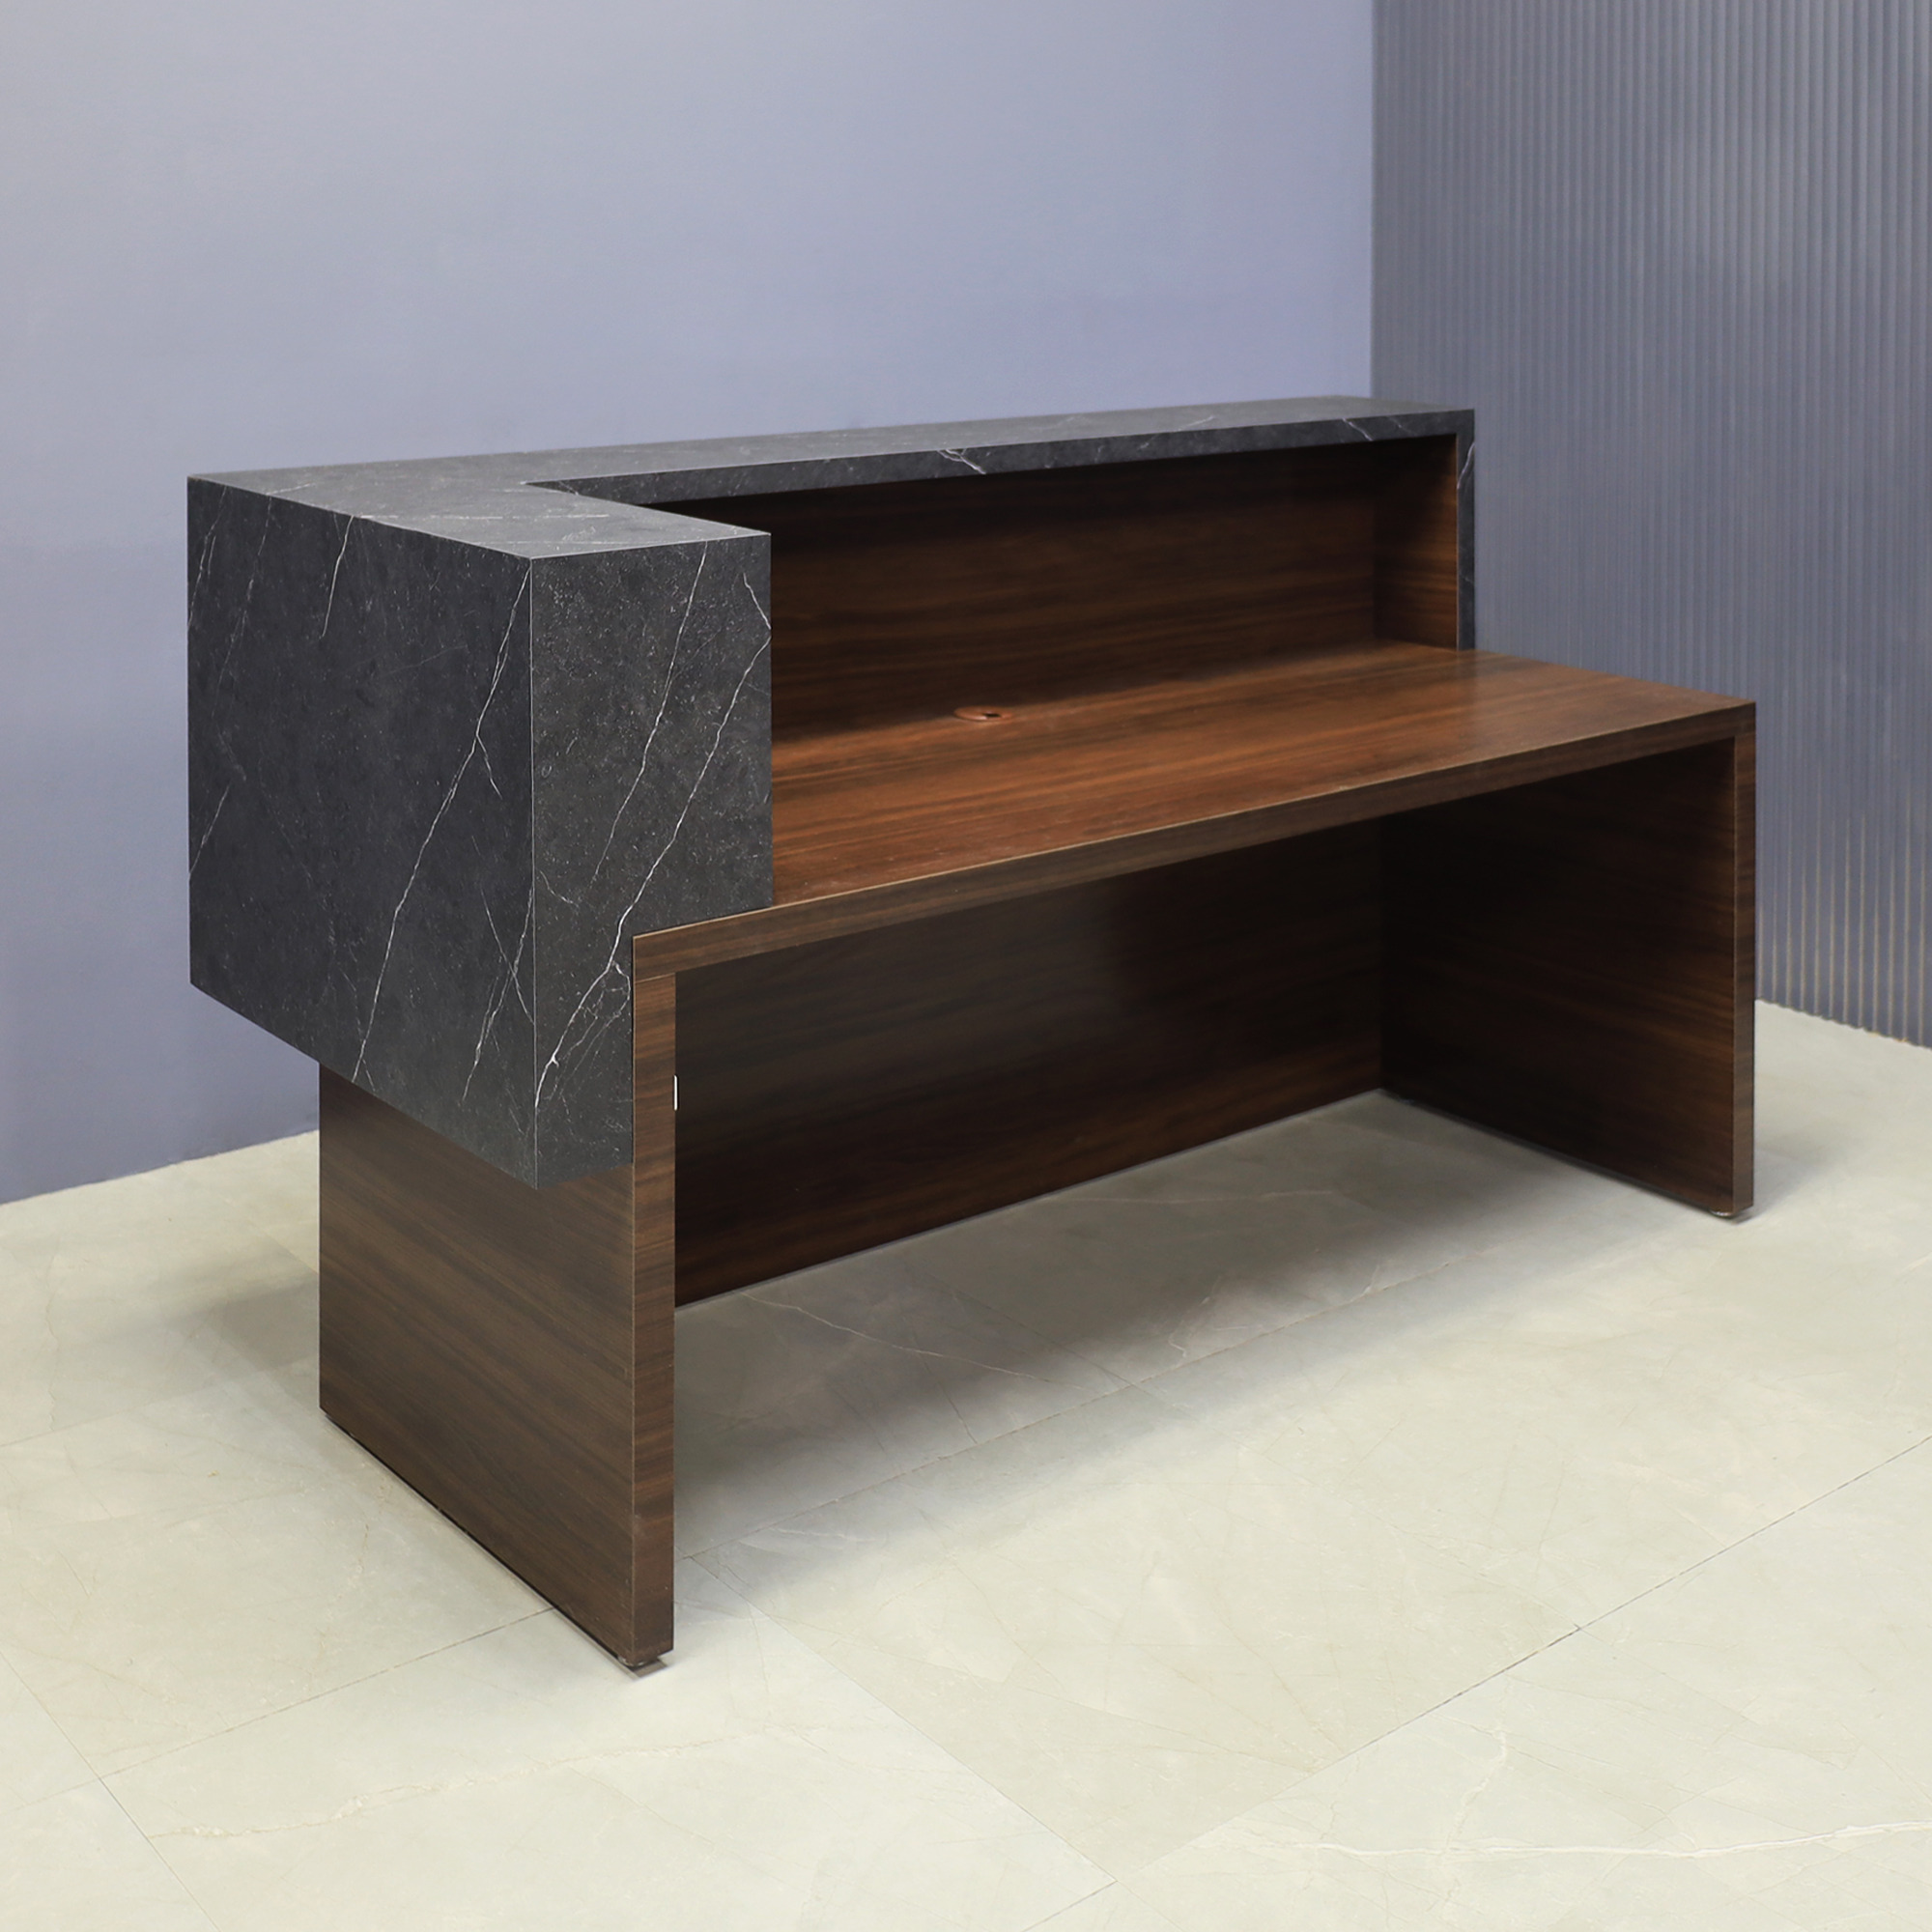 72-inch San Francisco L-Shape Reception Desk, right l-panel side when facing front in black sone pvc counter and colombian walnut matte laminate desk, with white LED, shown here.